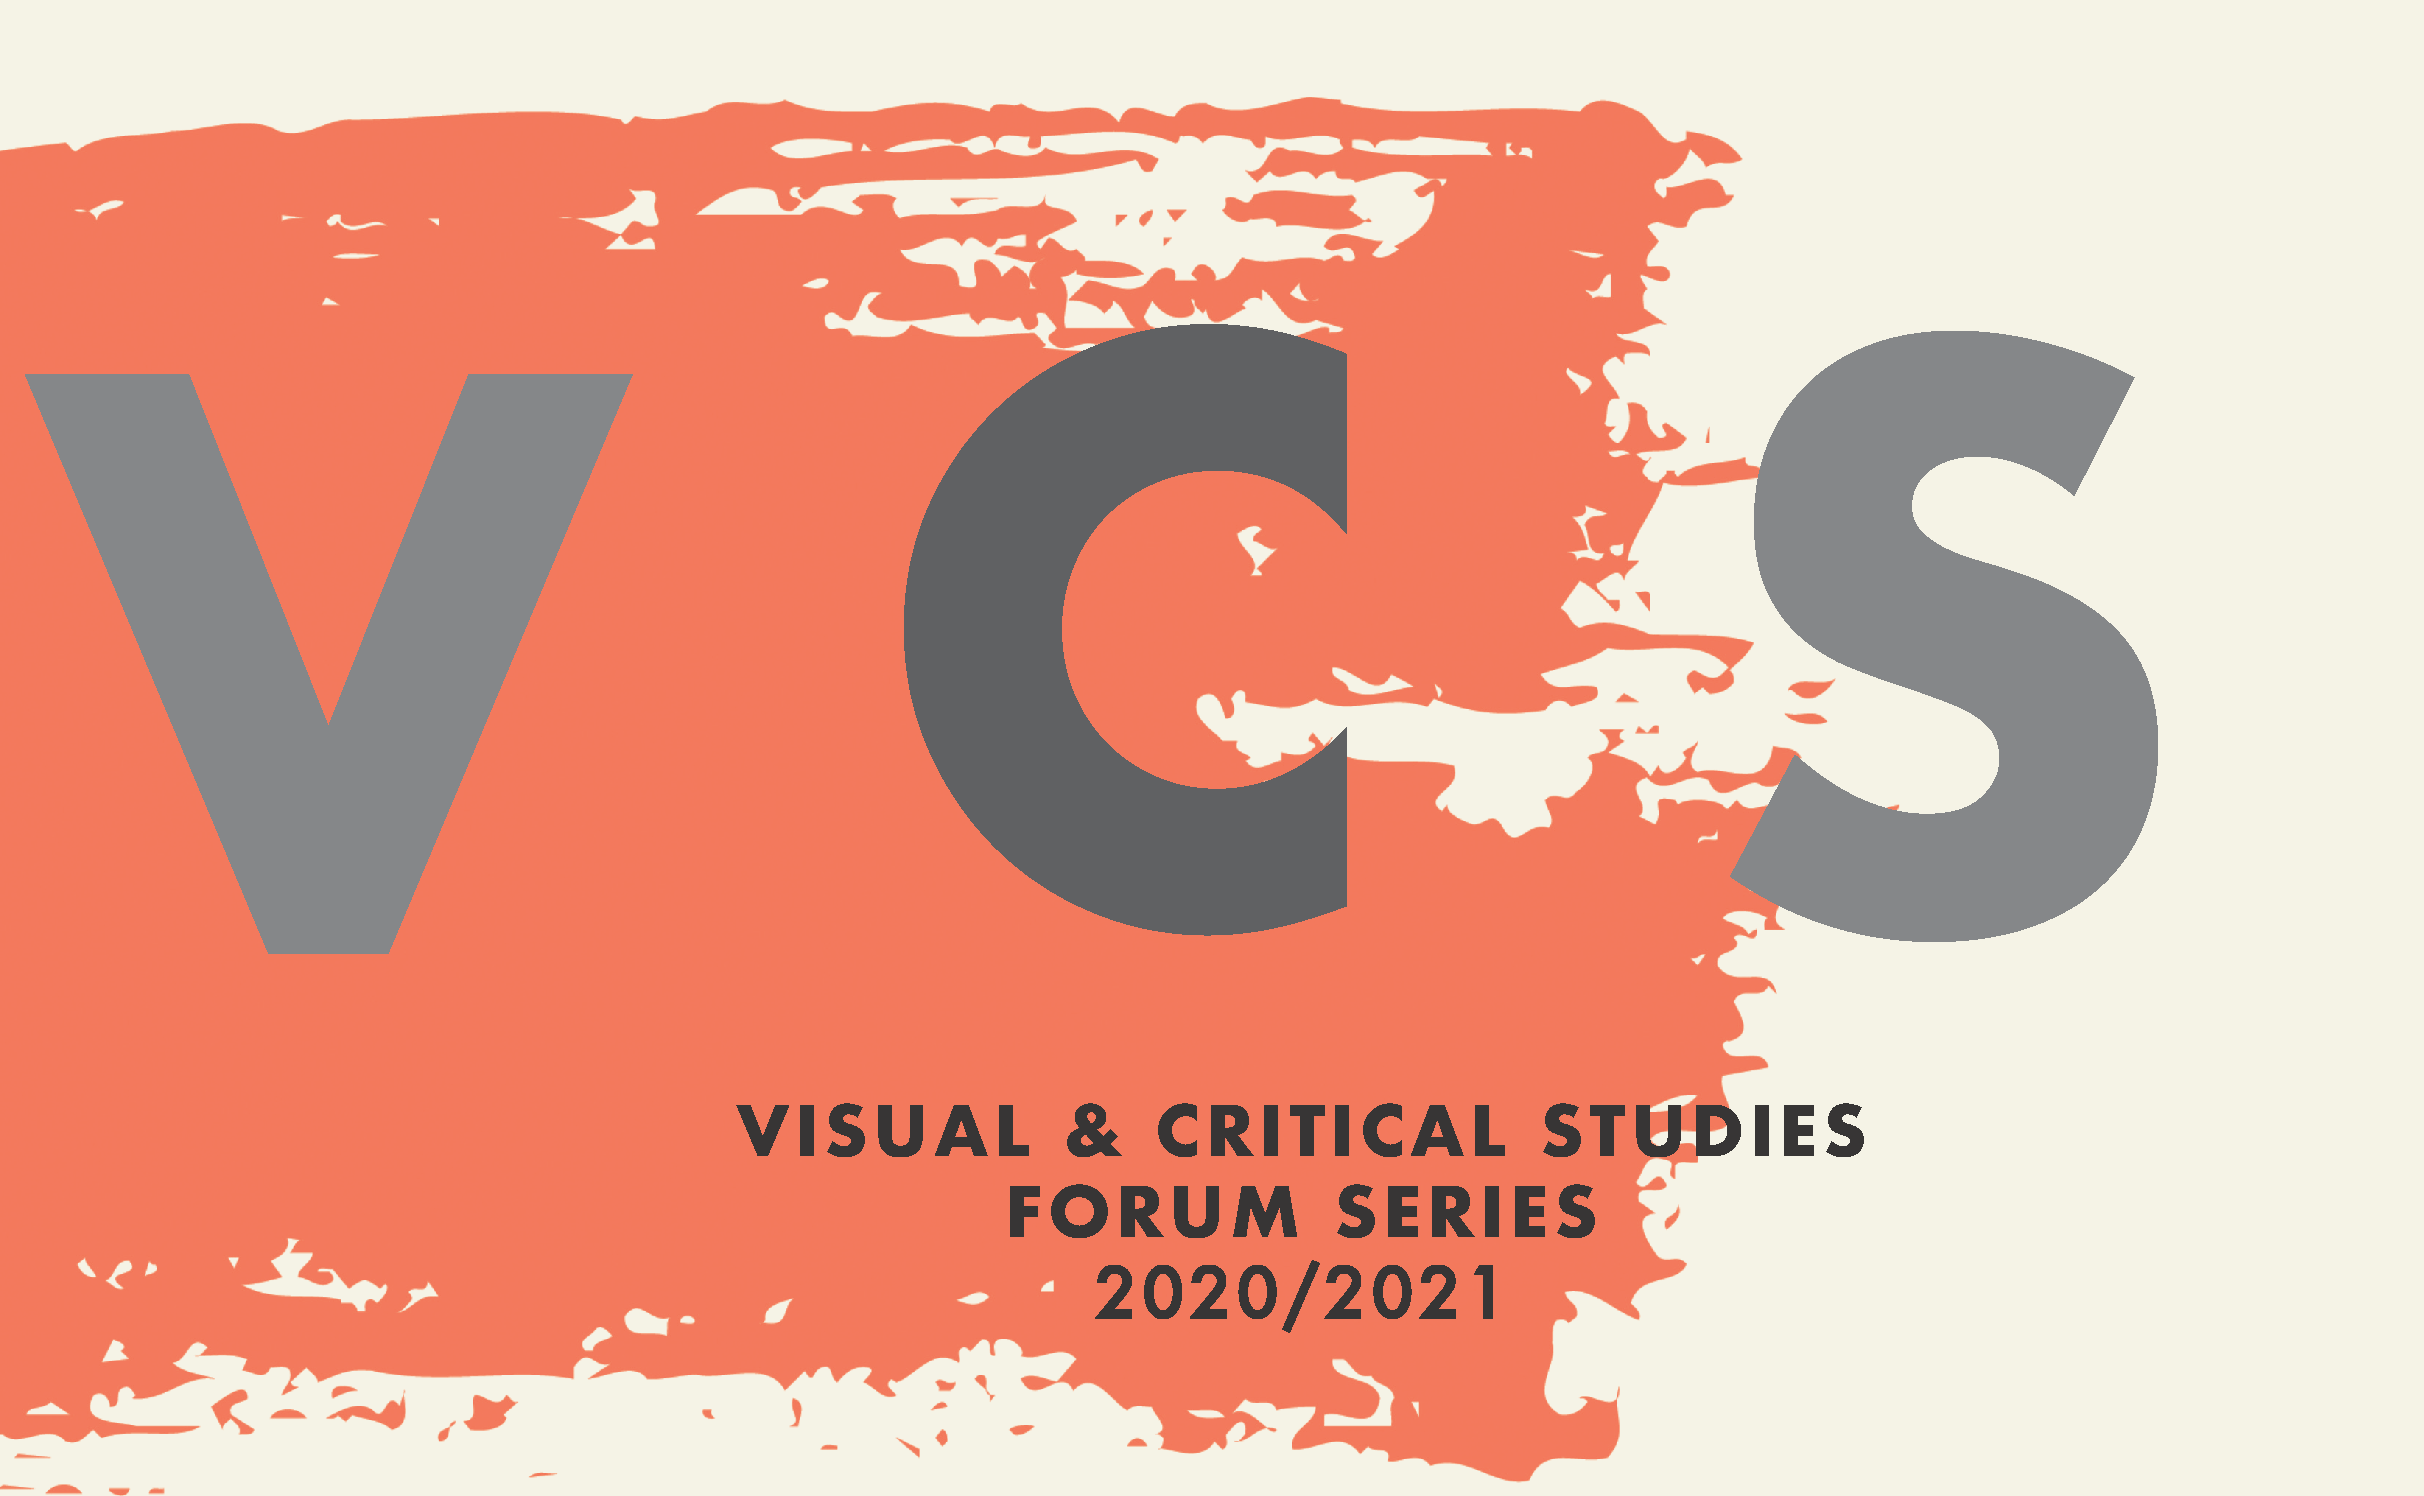 VCS Forum Series Poster 2020-2021.png